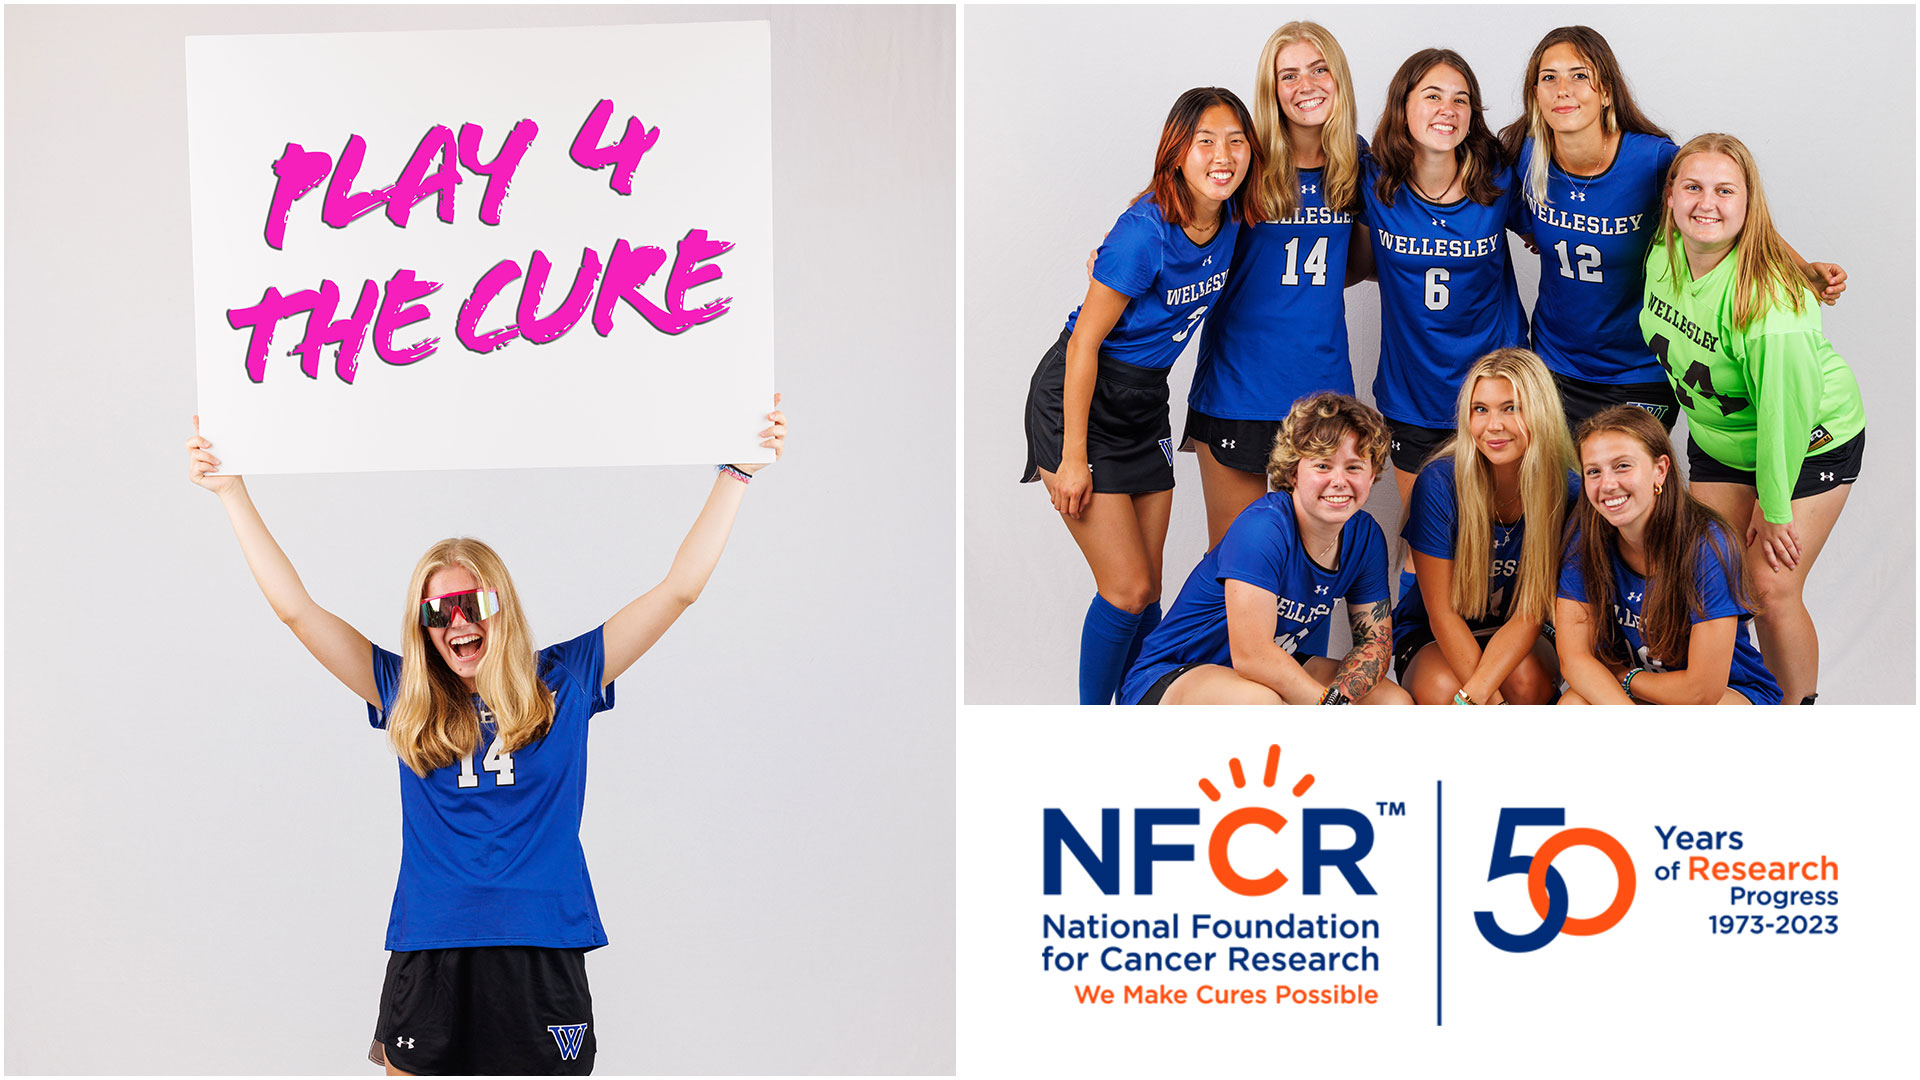 Wellesley field hockey will host its Play4TheCure Game on Saturday, October 14 (Frank Poulin).